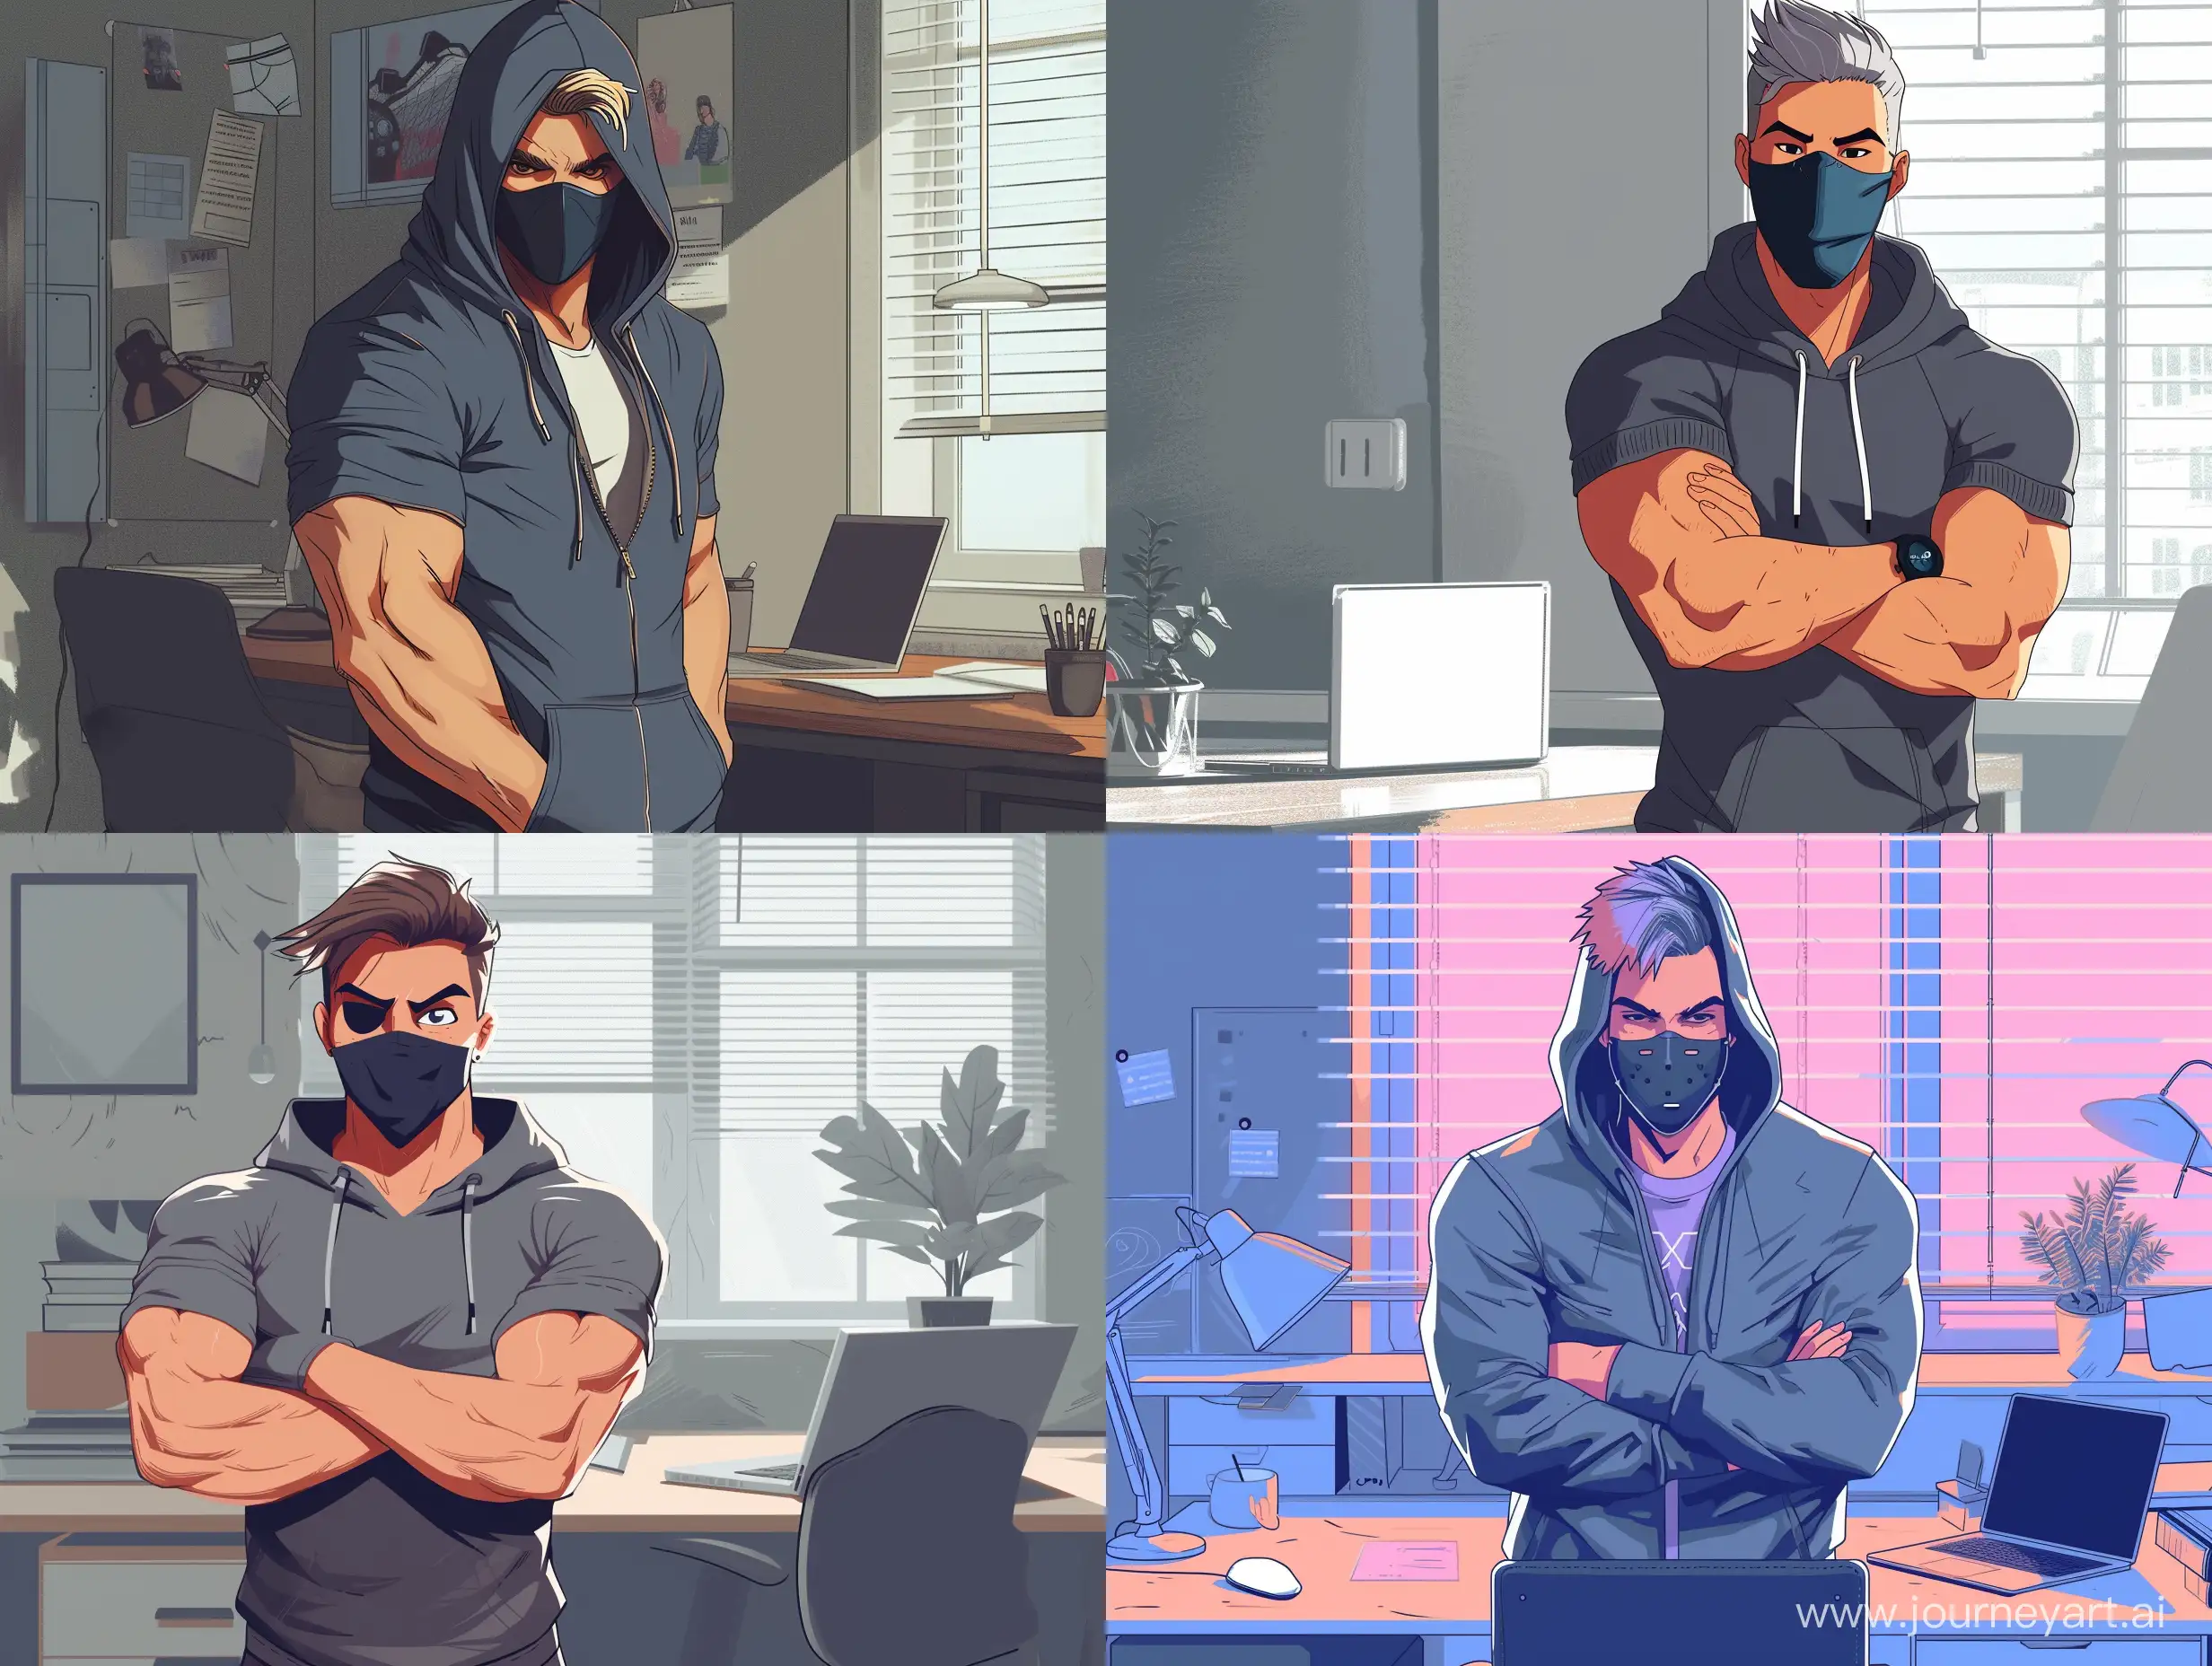 Stylish-Masked-Man-Working-on-Laptop-at-Contemporary-Desk-in-Cartoon-Style-8K-Quality